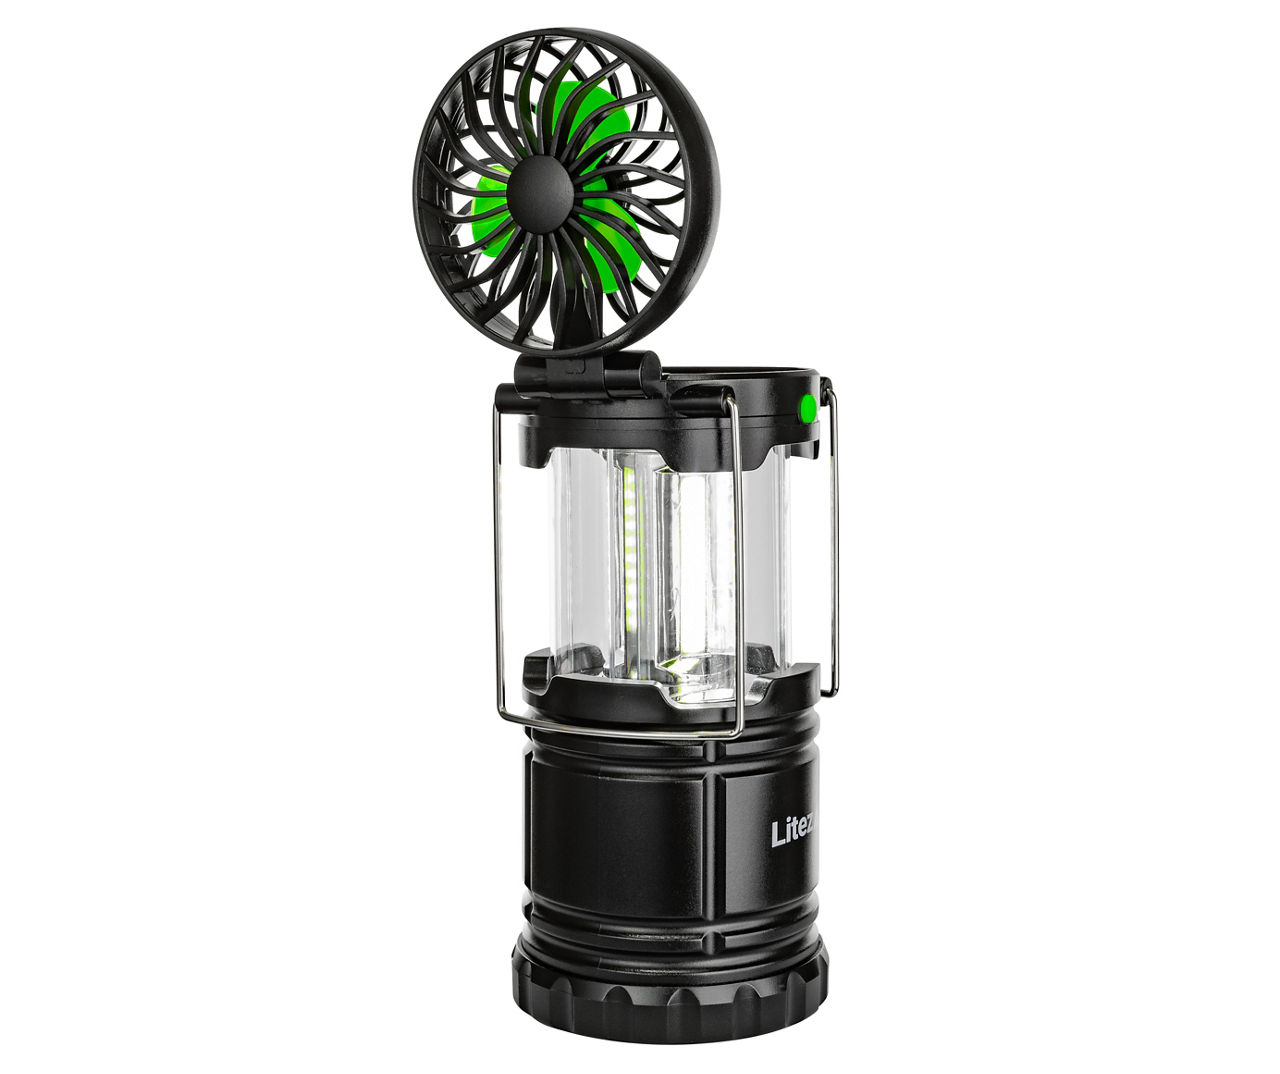 LED Camping Lights Fans Side Lantern Battery Powered Outdoor Black New